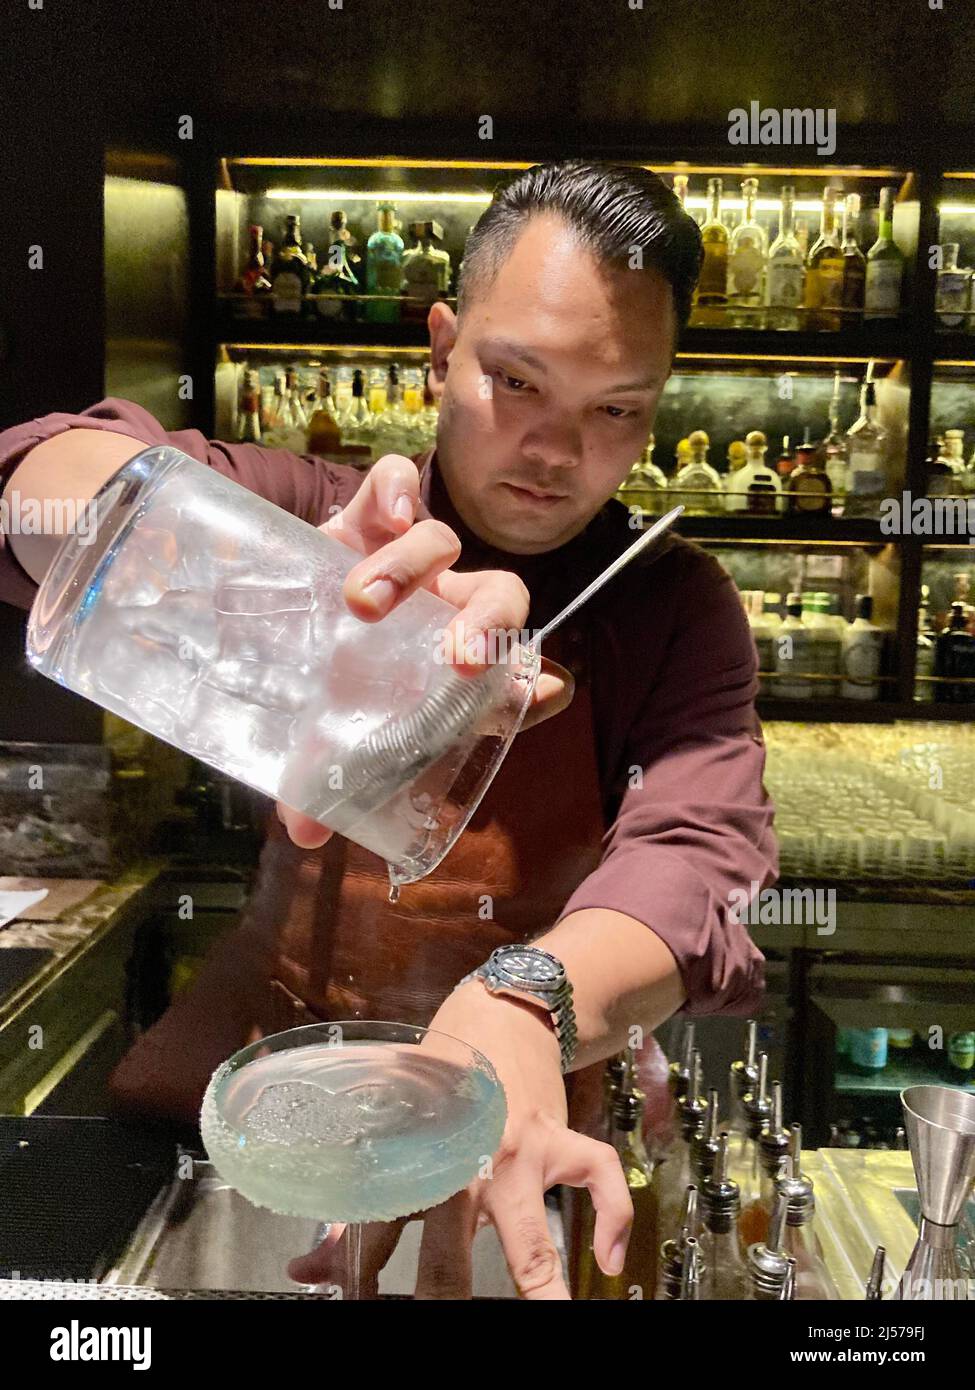 Bangkok, Thailand. 18th Apr, 2022. Chanakan Thaoanon, head bartender at Bamboo Bar in the Mandarin Oriental Hotel, mixes a 'Life's a Beach' cocktail from the new menu. Bartenders today are creating innovative cocktails with flavors that offer unforgettable taste experiences - and ingredients you wouldn't expect to find in drinks. Mixology is both art and science. (to dpa 'The essence of stones: How mixology is revolutionizing bar culture') Credit: Carola Frentzen/dpa/Alamy Live News Stock Photo